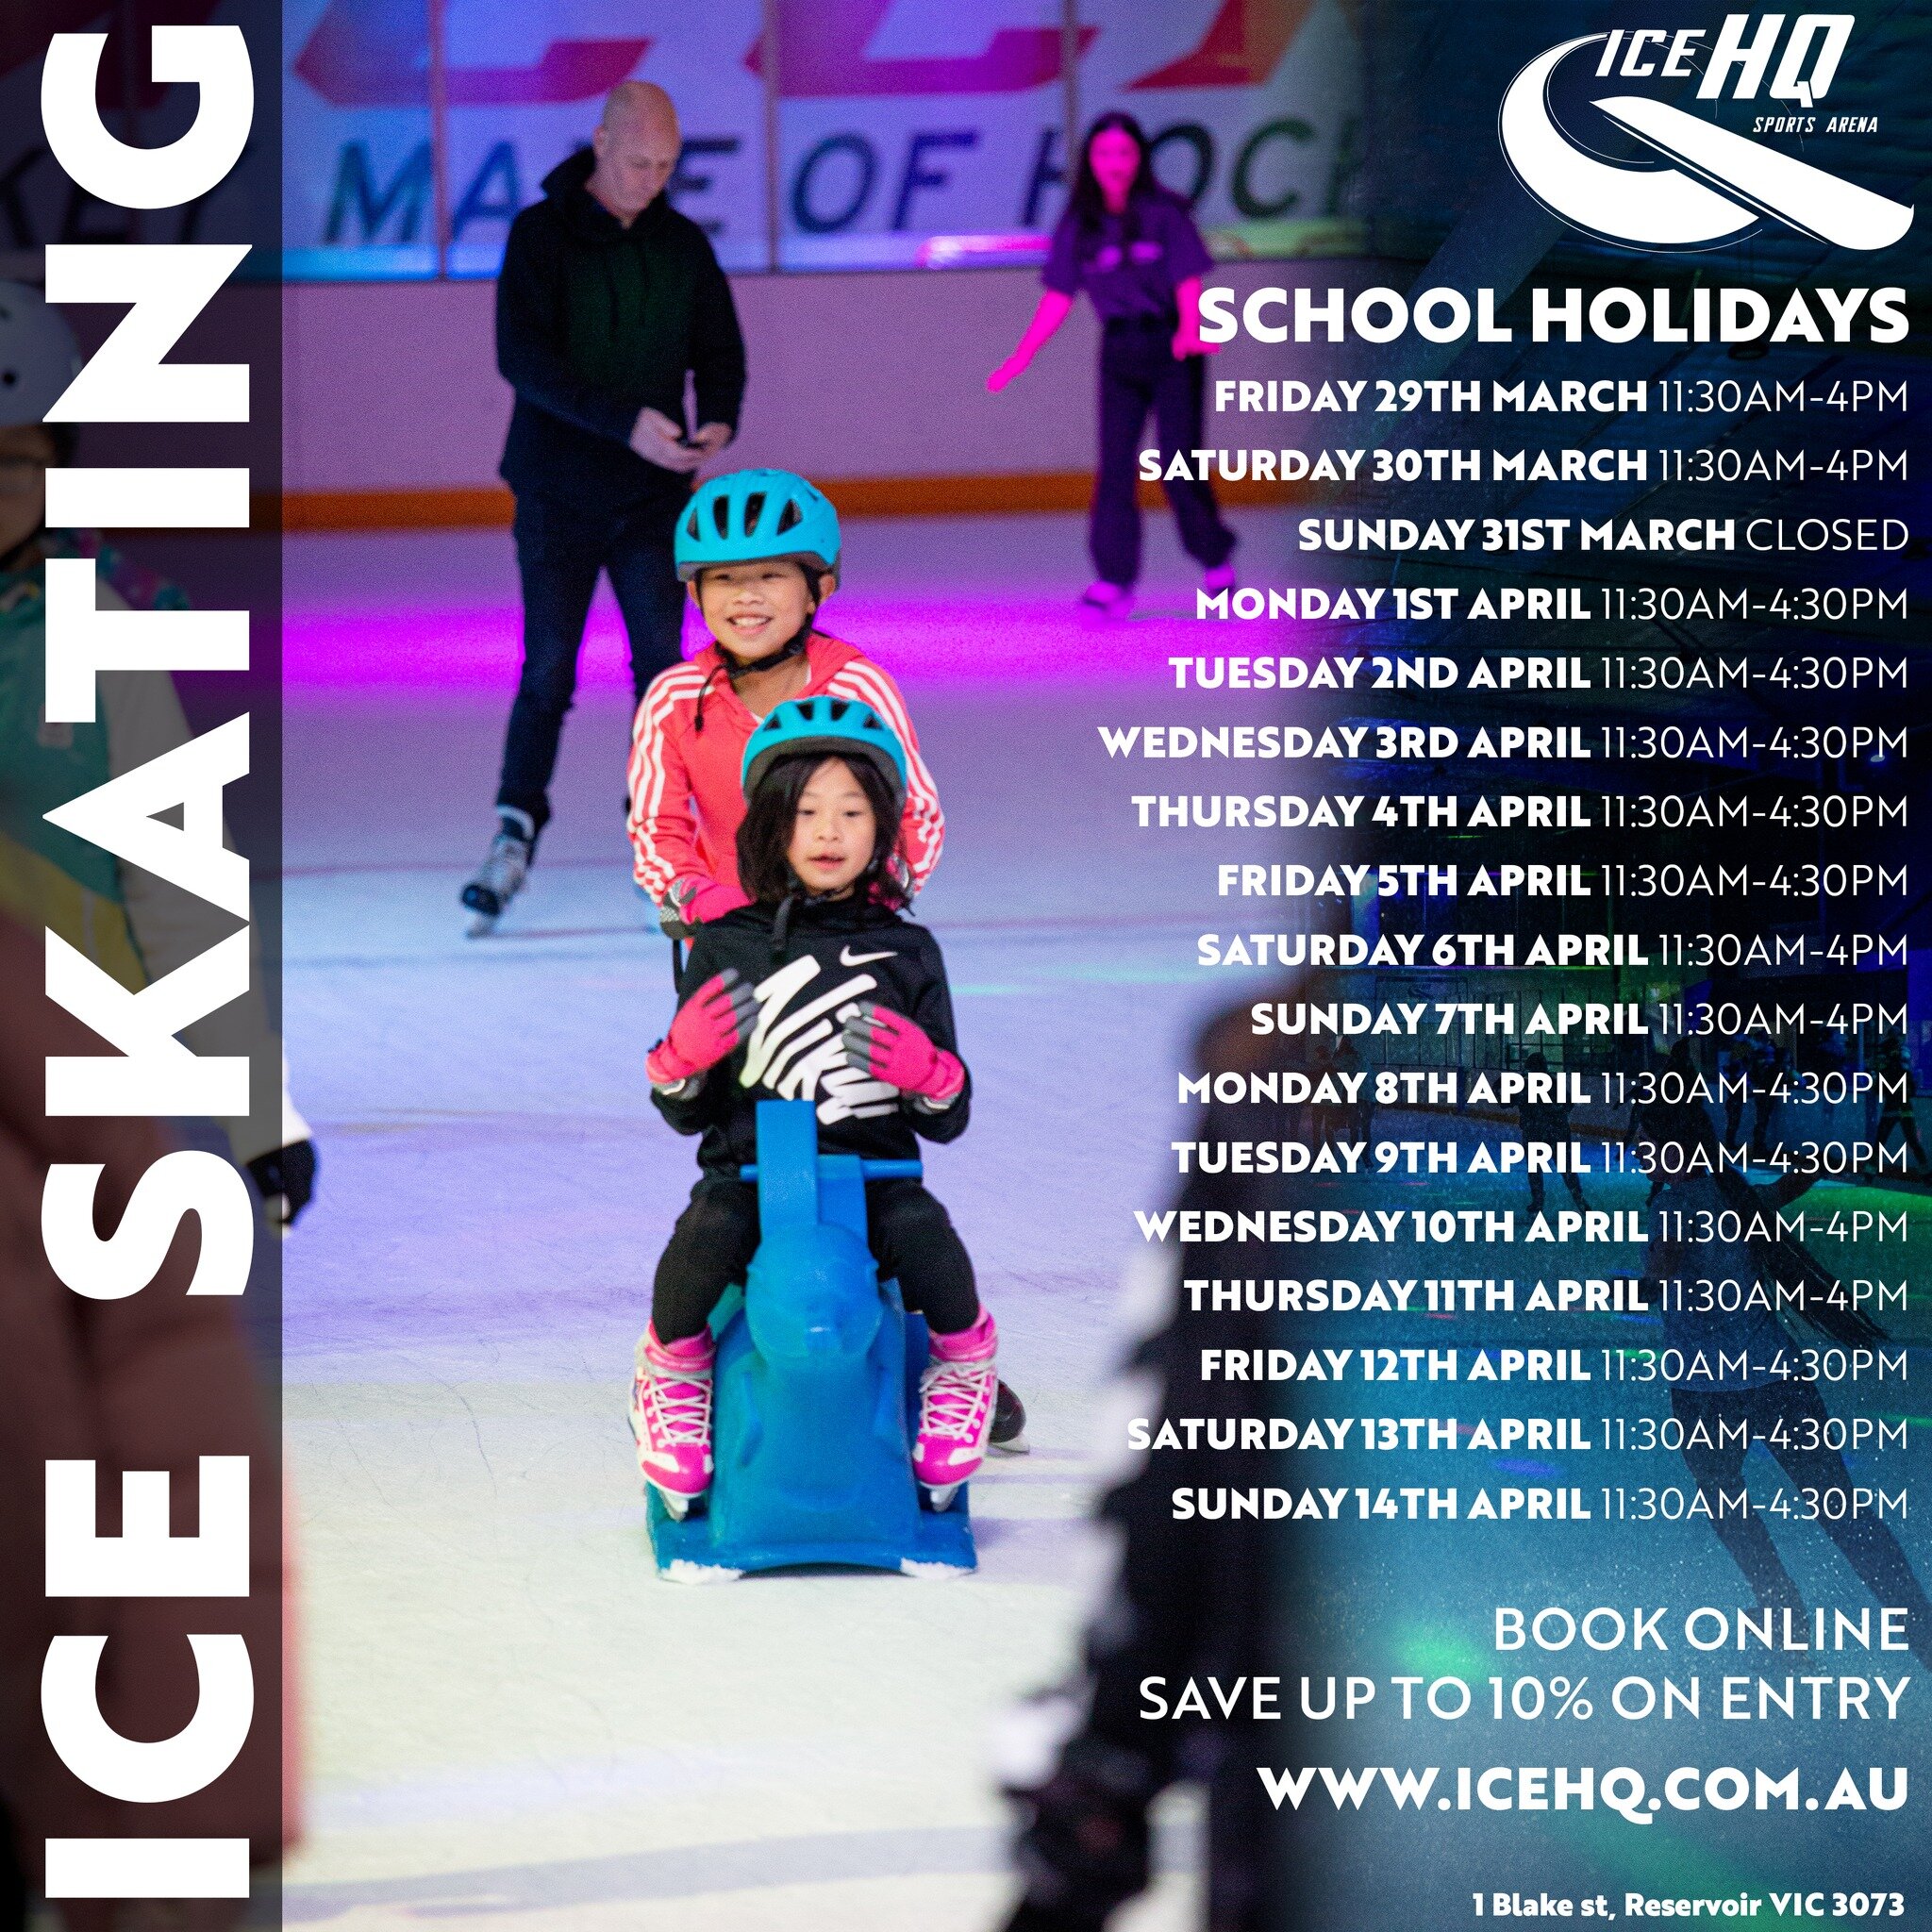 School Holiday ice skating 🤗⛸️
Book online to save up to 10% on entry prices

We'll be open everyday of the school holidays (except Easter Sunday)
Ice skating 11:30am-4:30pm with some days 11:30am-4pm book via our website for each day's specific ses